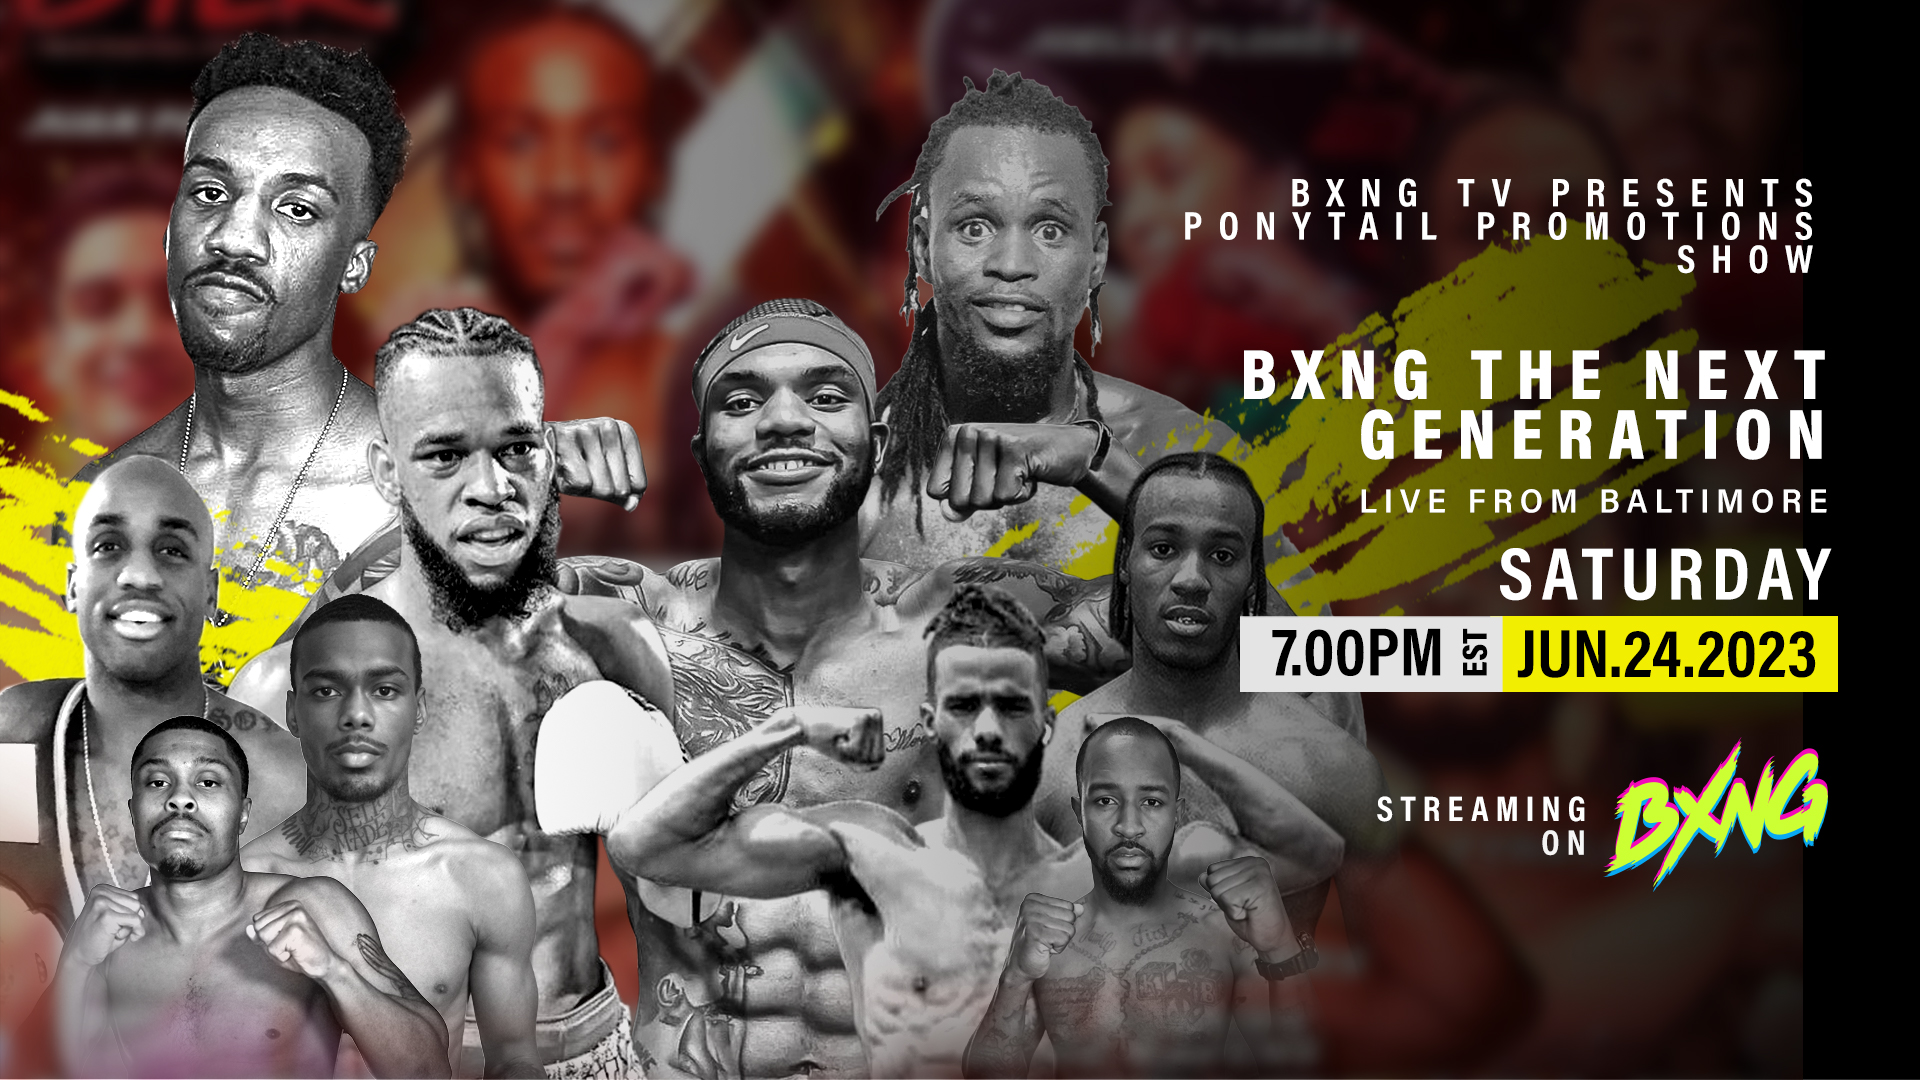 BXNG TV Presents Ponytail Promotions Show Live Stream 06/24/23